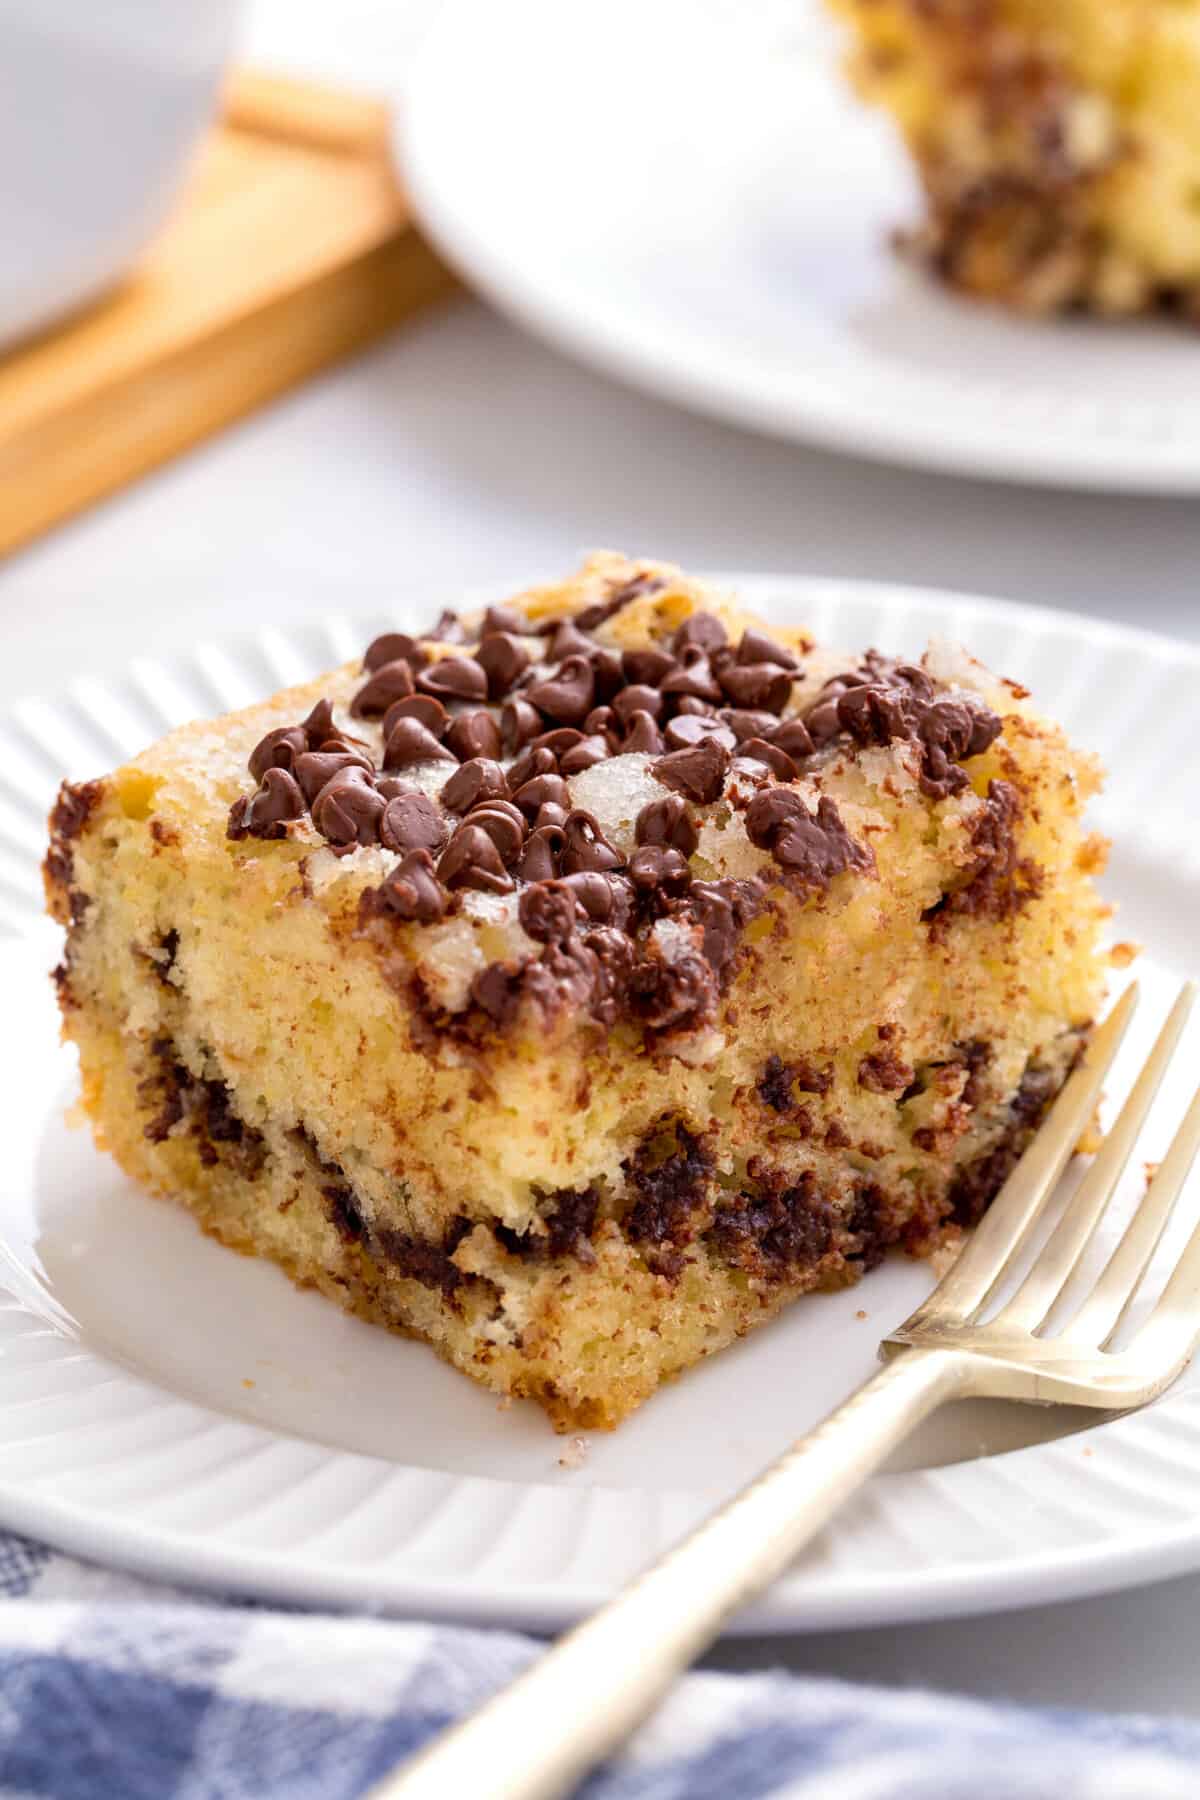 square slice of chocolate chip cake served on a white round plate with a gold fork